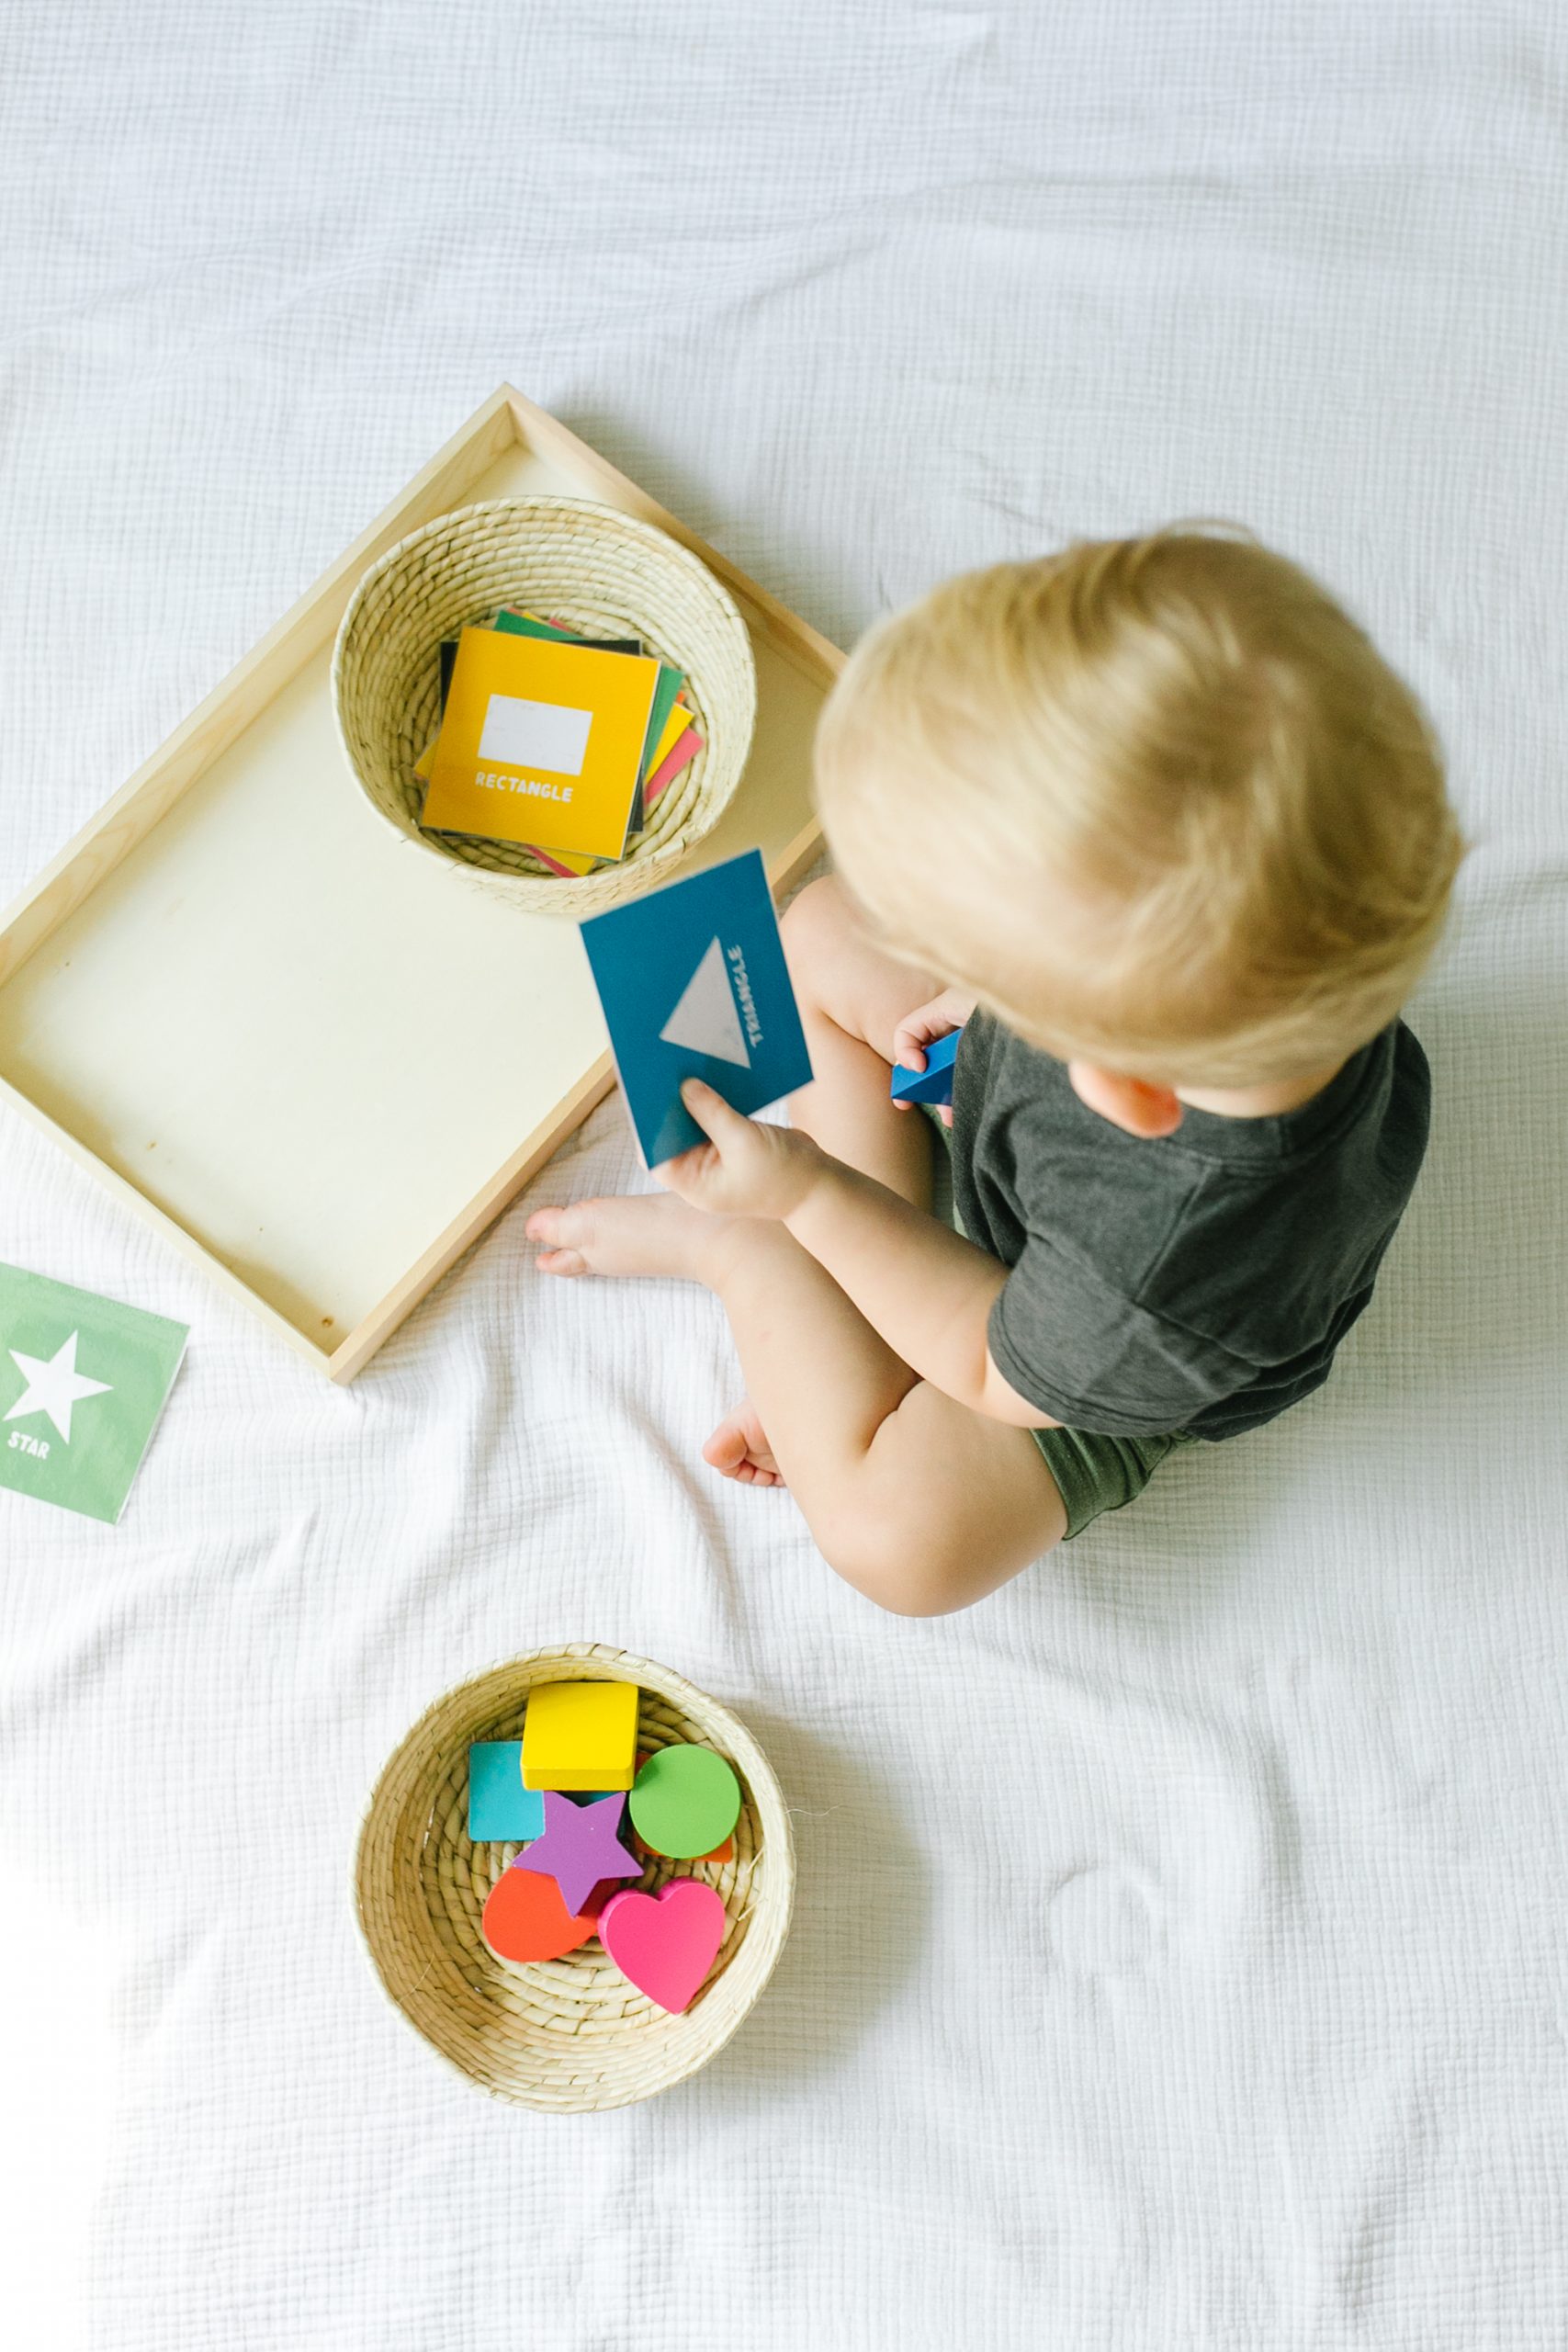 montessori activities for toddlers